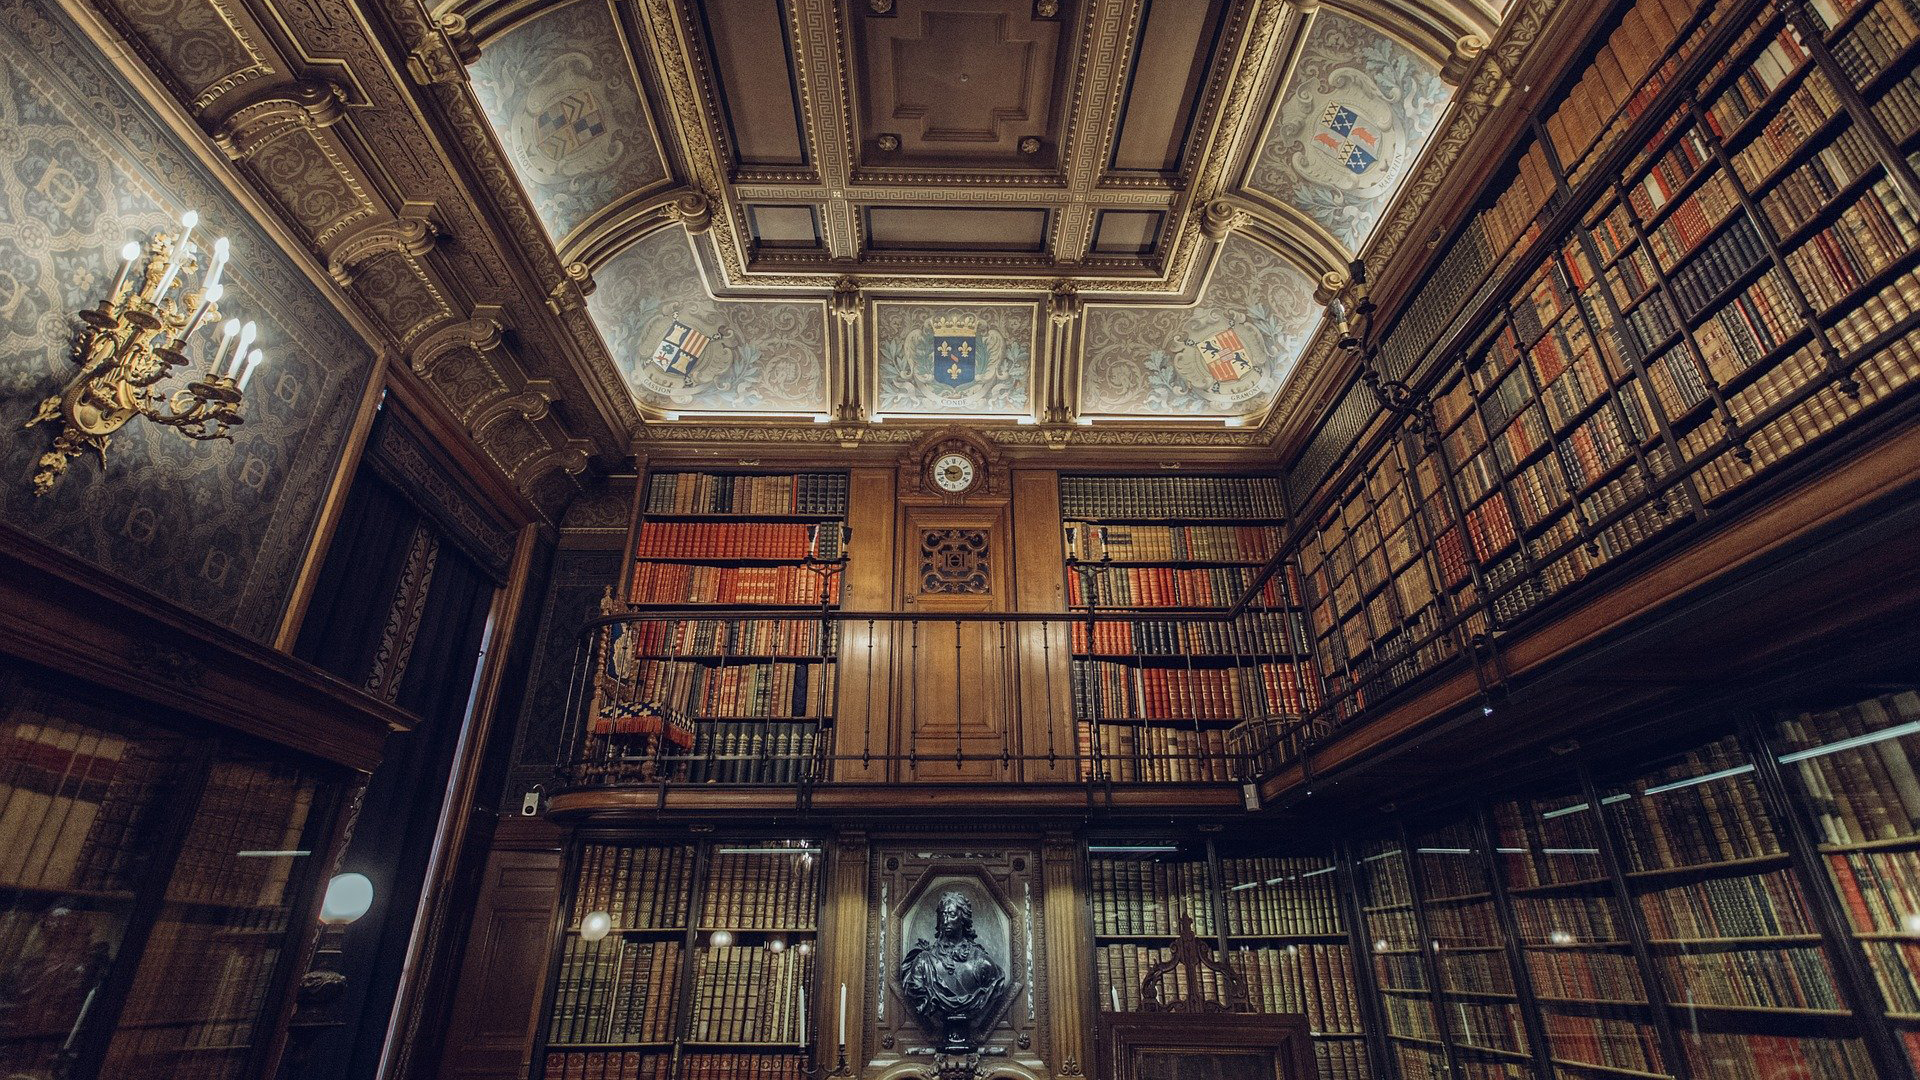 Old library. Virtual background to use on Zoom, Microsoft Teams, Skype, Google Meet, WebEx or any other compatible app.